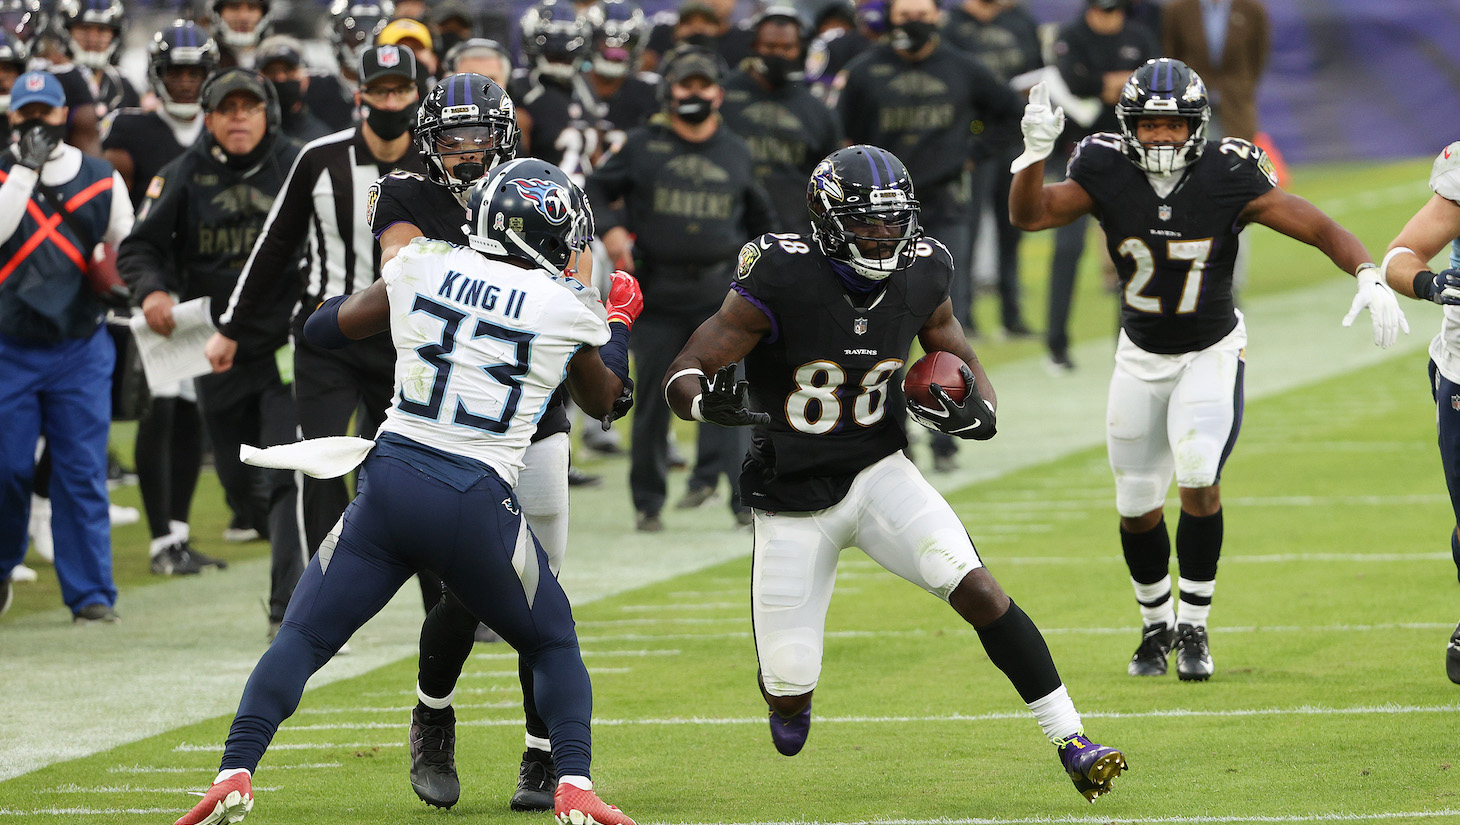 BALTIMORE, MARYLAND - NOVEMBER 22: Dez Bryant #88 of the Baltimore Ravens runs after a catch against the Baltimore Ravens during the game at M&amp;T Bank Stadium on November 22, 2020 in Baltimore, Maryland. (Photo by Patrick Smith/Getty Images)